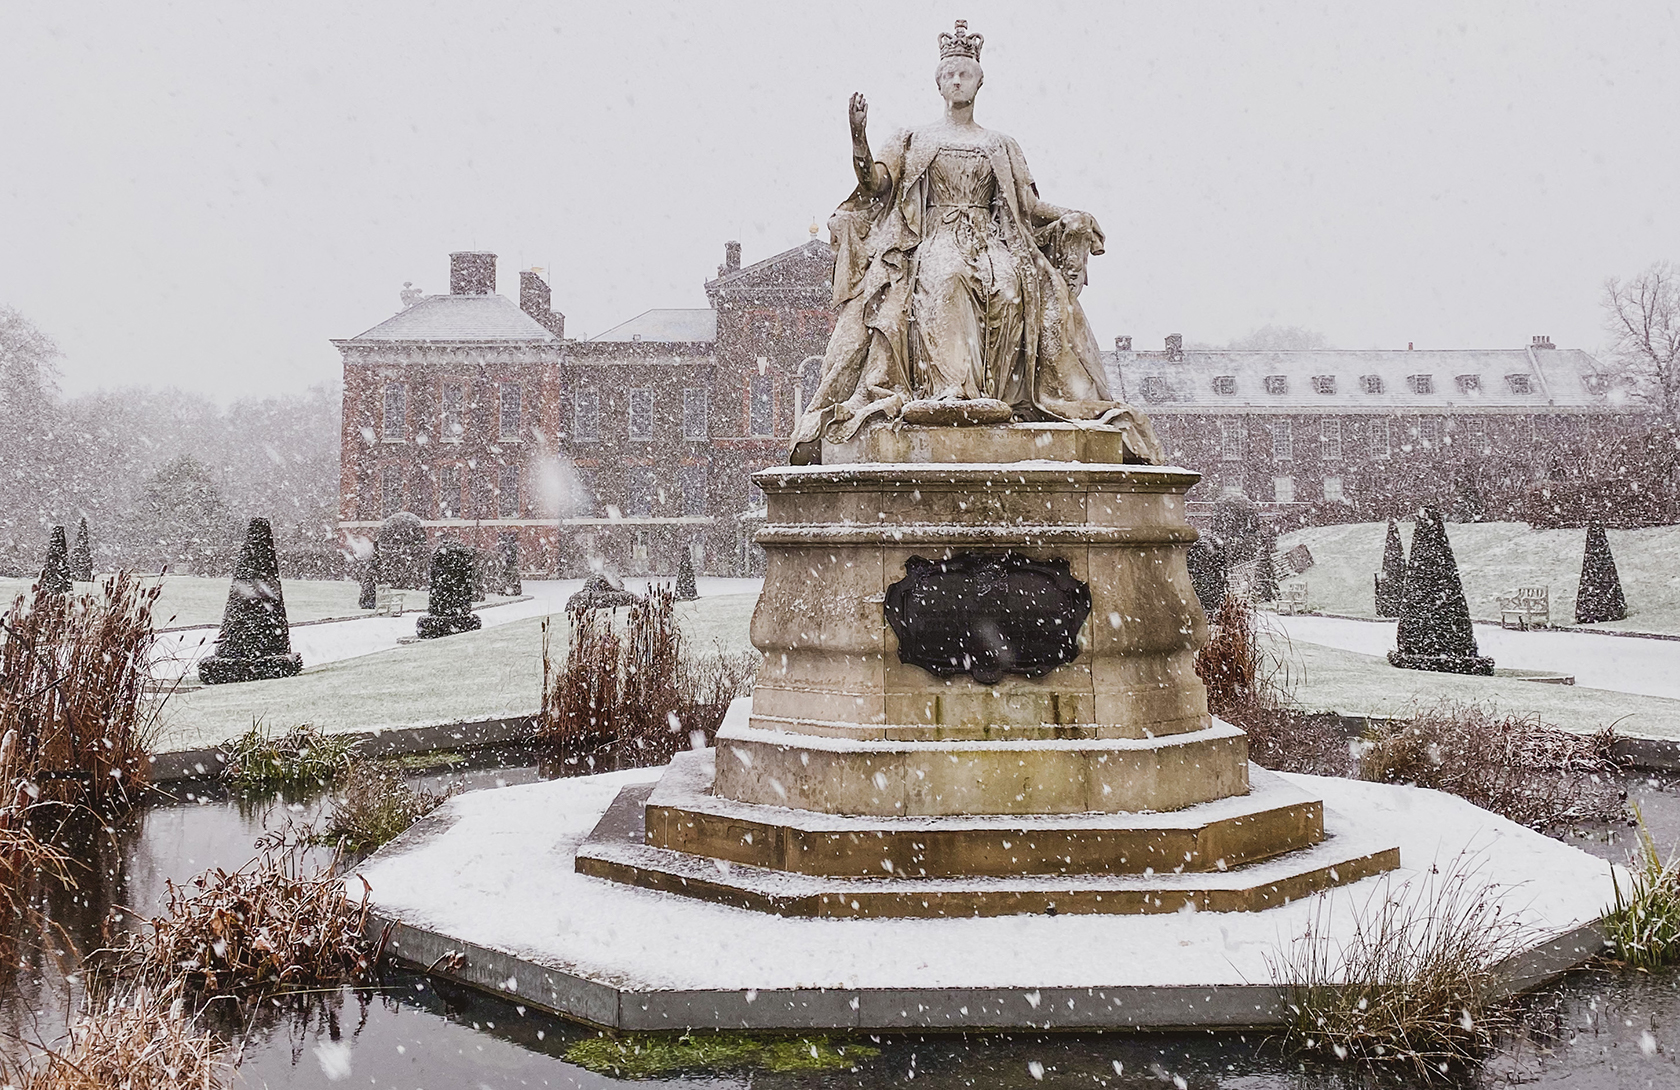 Kensington Palace in the snow